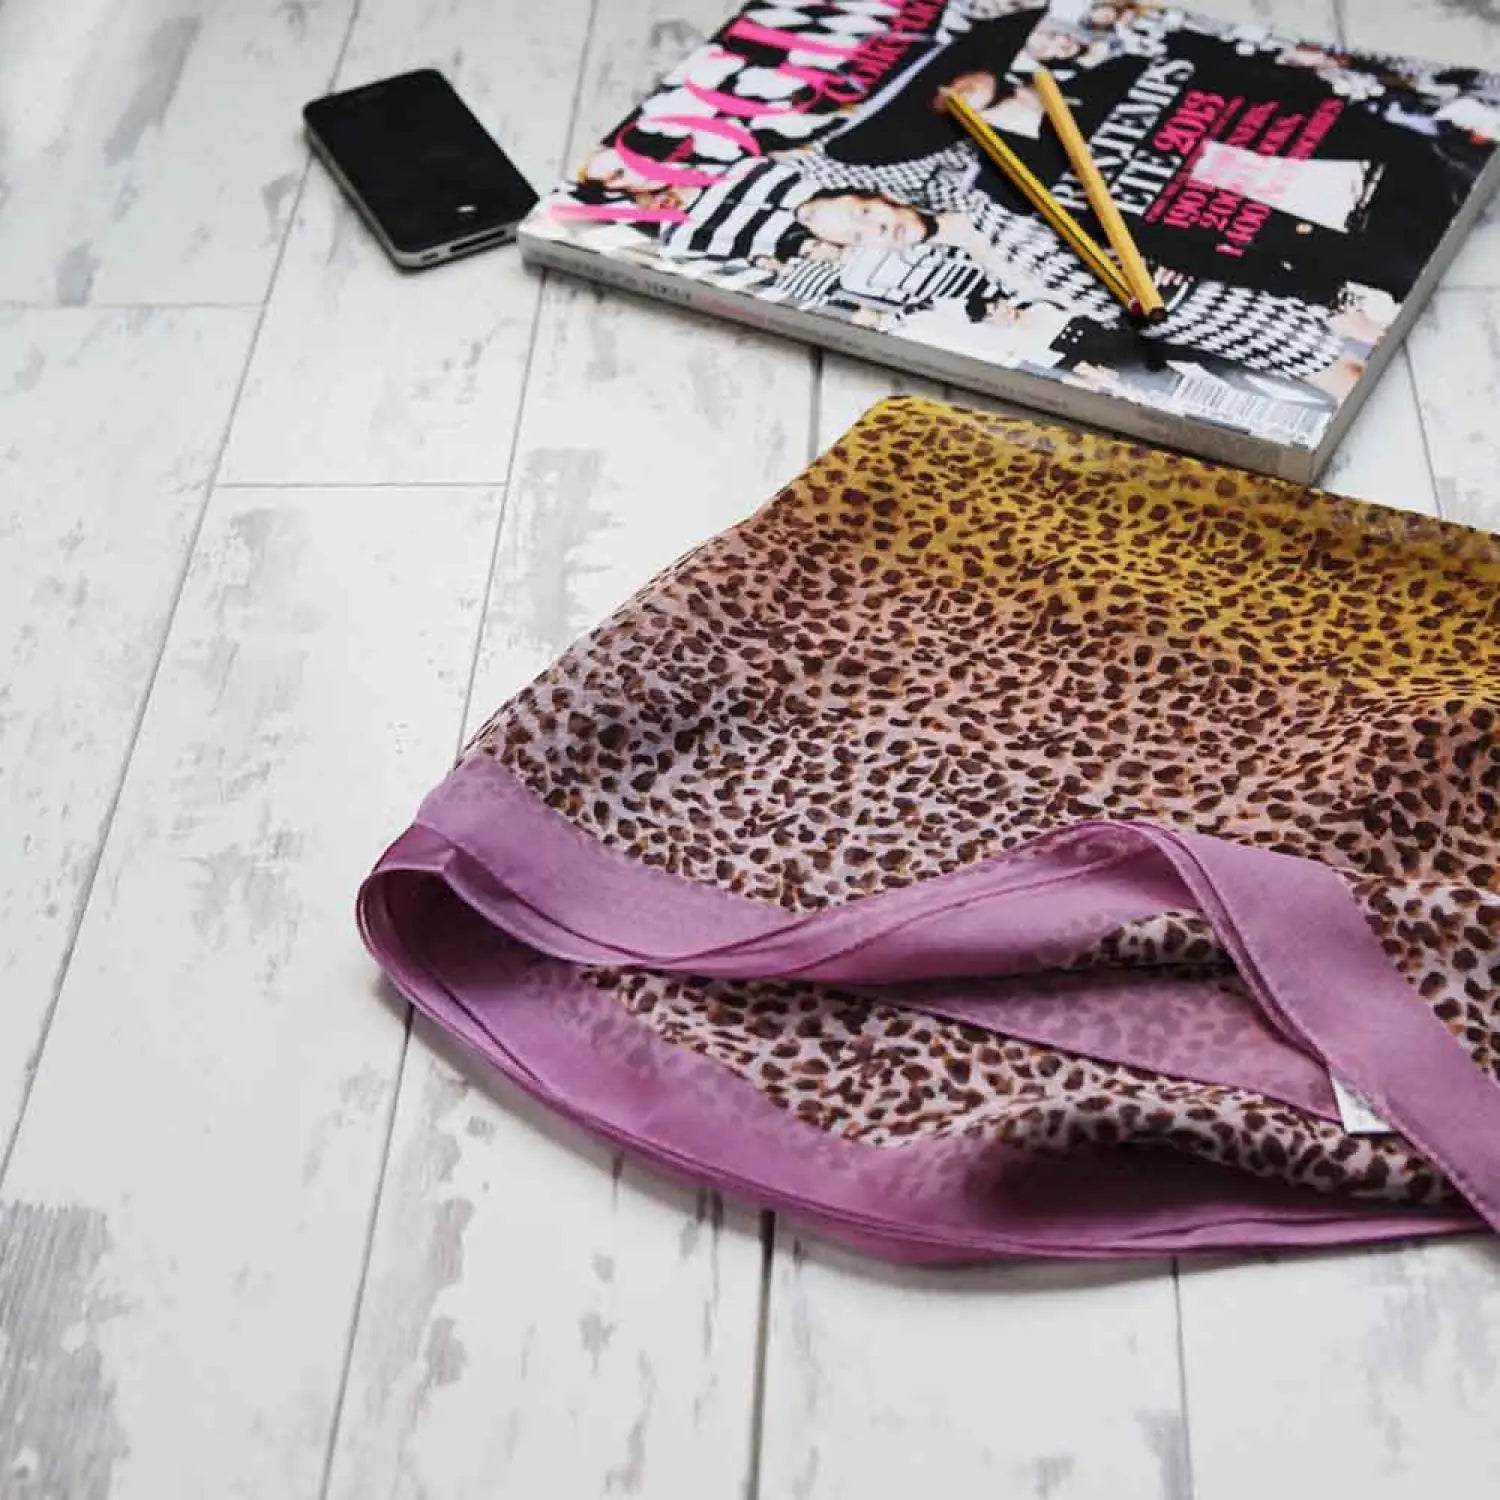 Leopard Print Tie Dye Silk Blend Scarf with Shoes